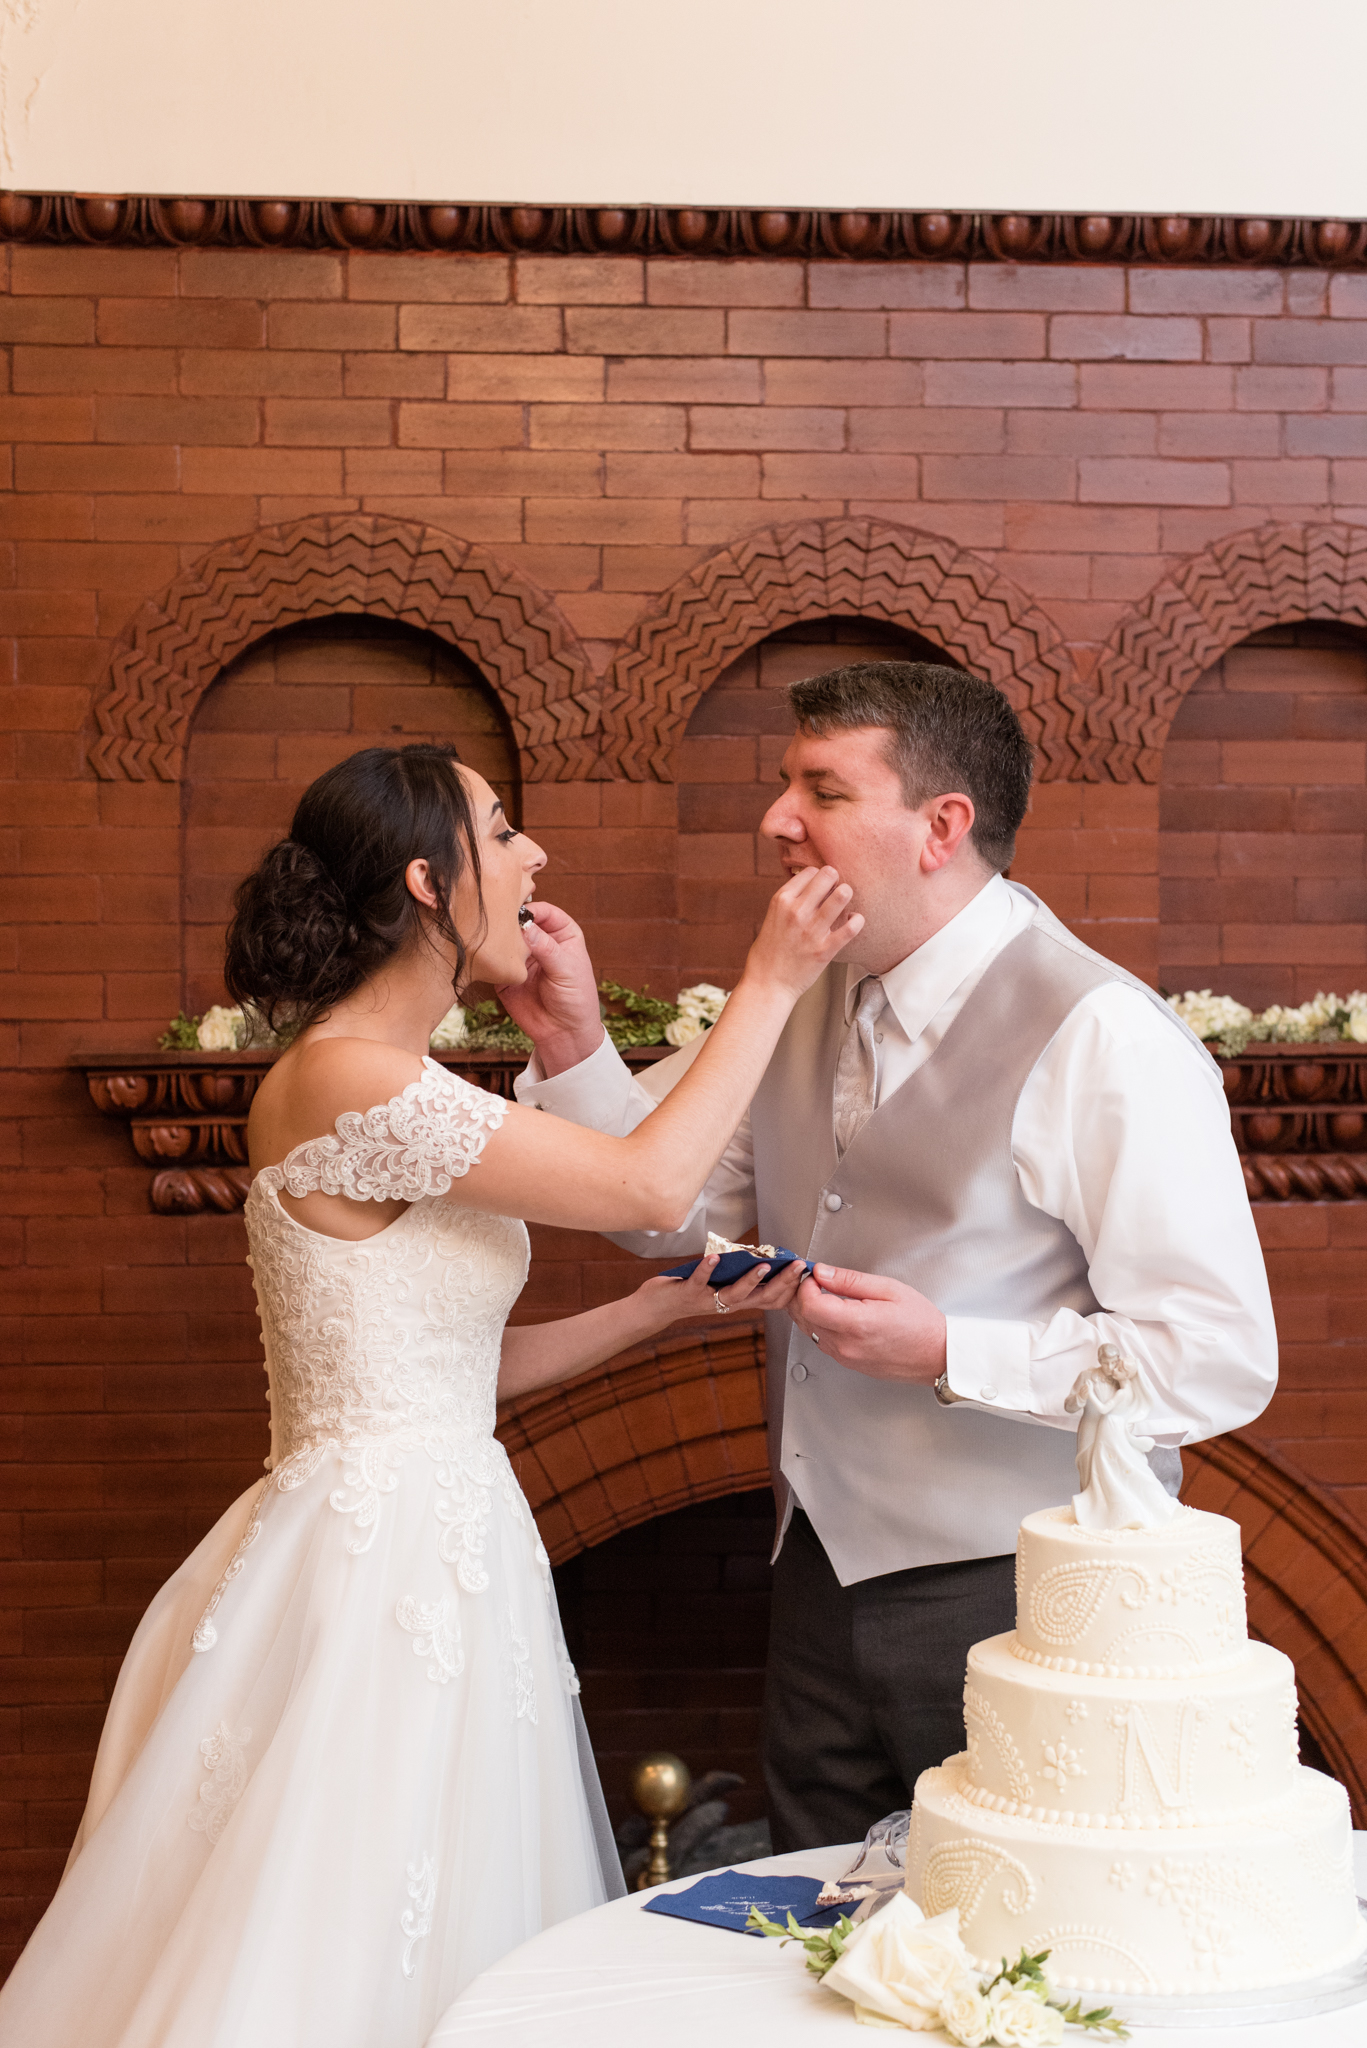 Bride and groom feed each other cake.